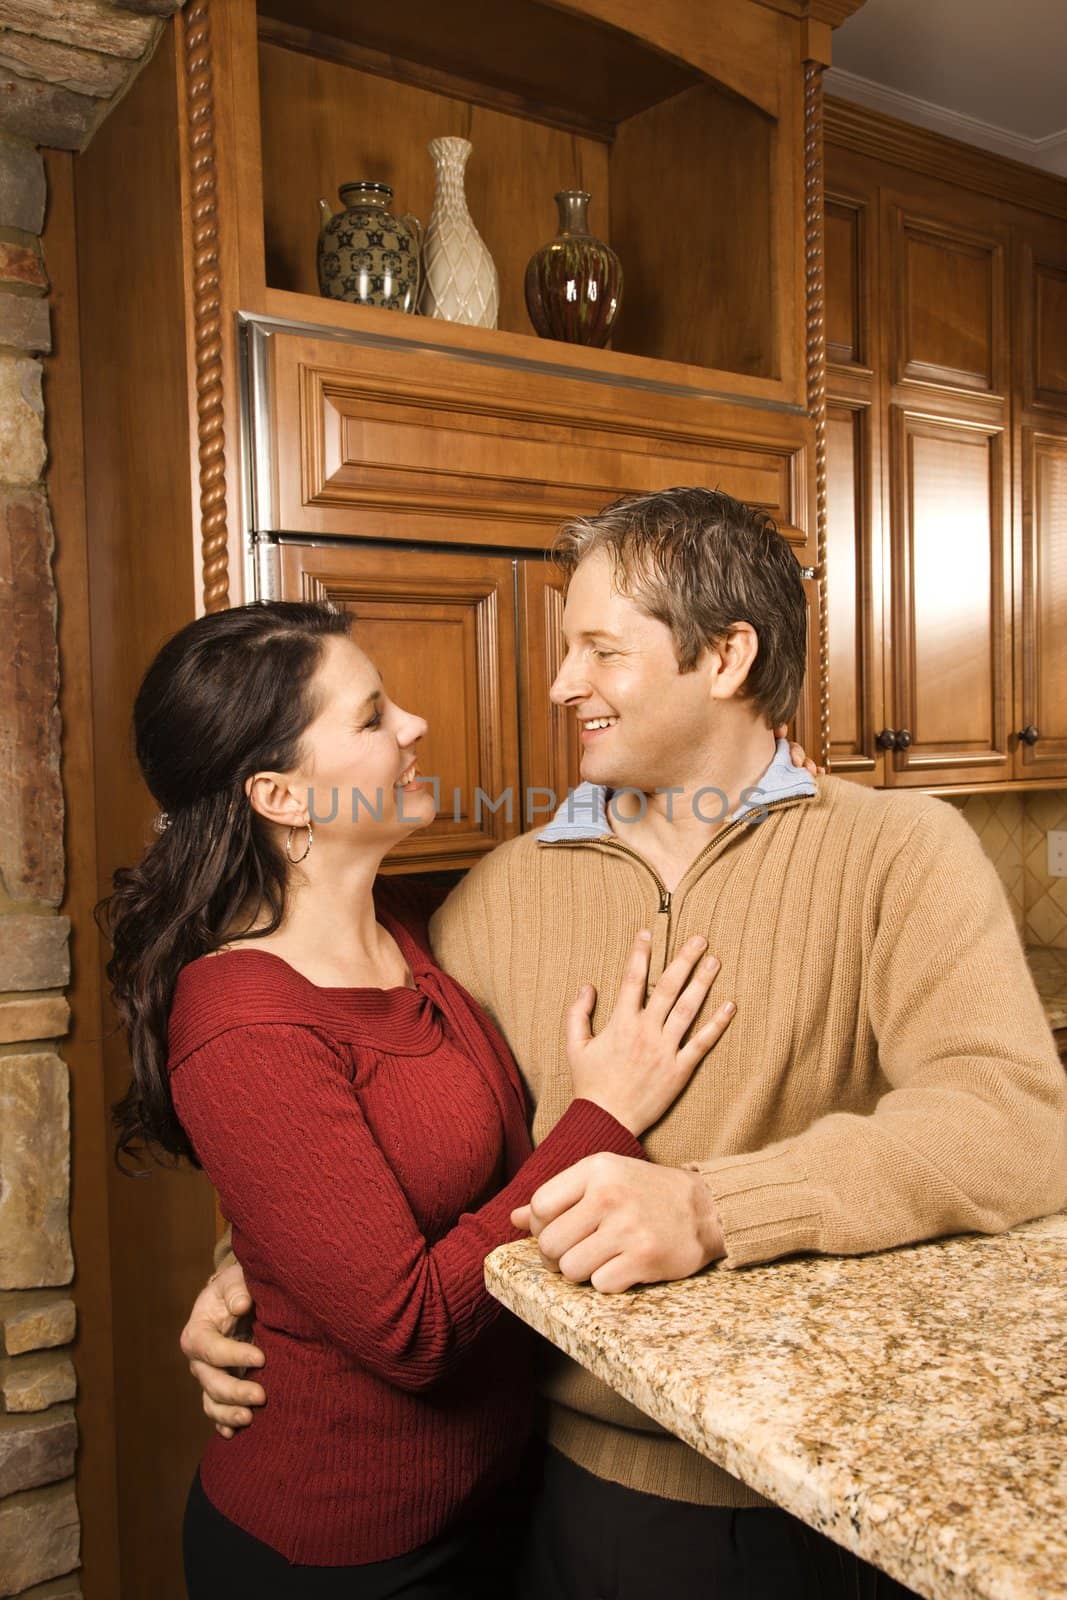 Caucasian woman and Caucasian man with arms around each other leaning on kitchen counter and smiling at each other.